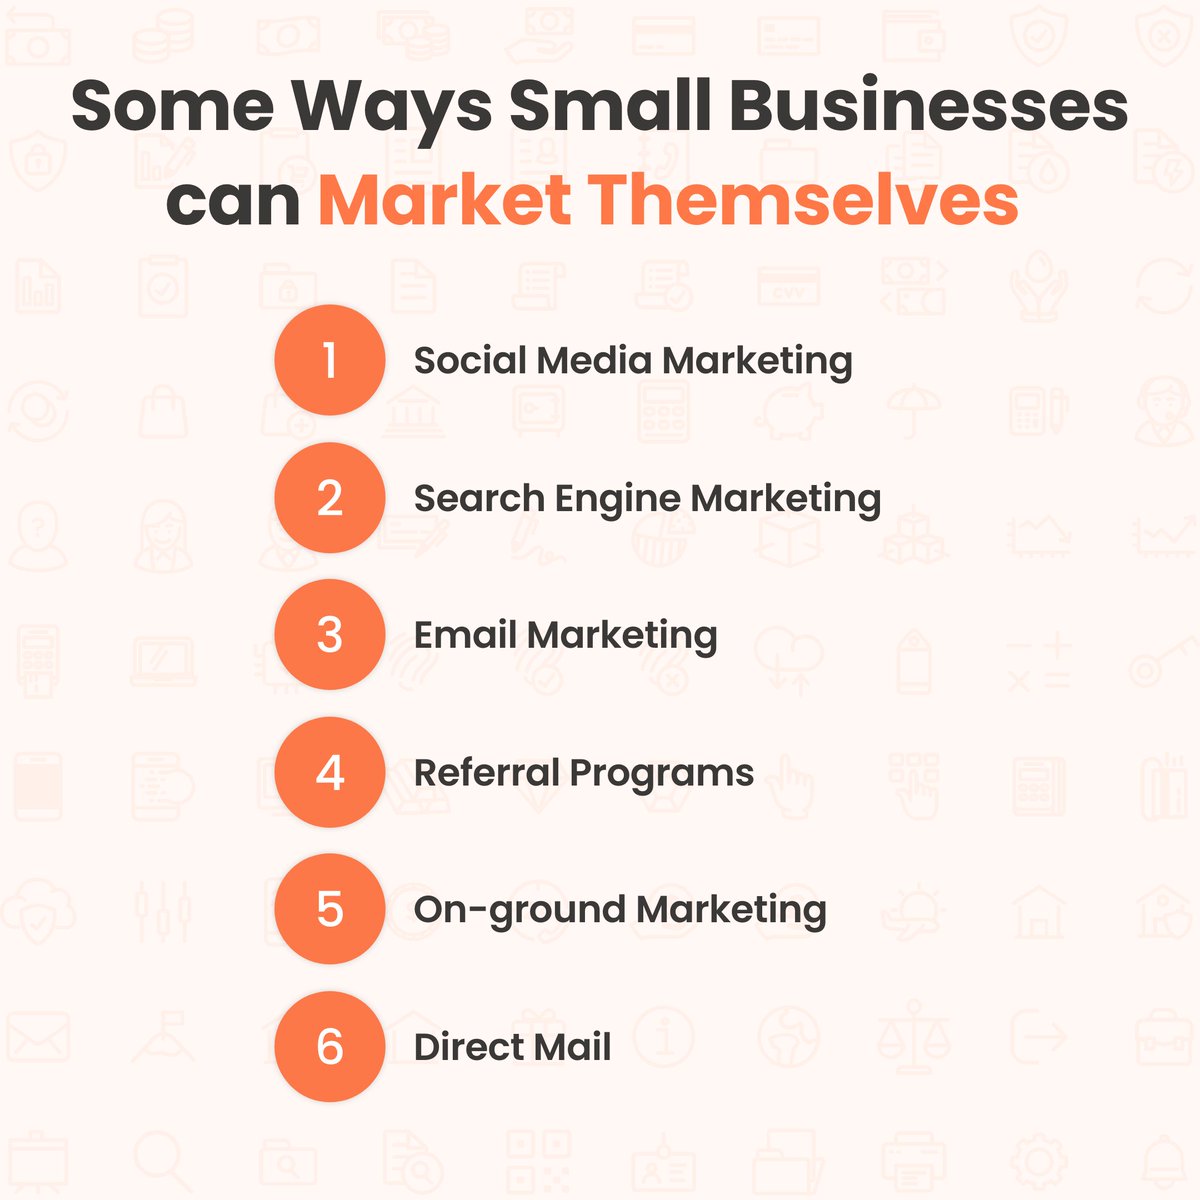 Below are some of the ways small businesses can effectively market themselves. Let us know if you agree and what else you would add. 
#invoicegenerator #smallbusiness #freelancer #invoicemaker #invoicing #billing #smallbusinessowner #smallbusinesstips #smallbusiness #invoicelabs